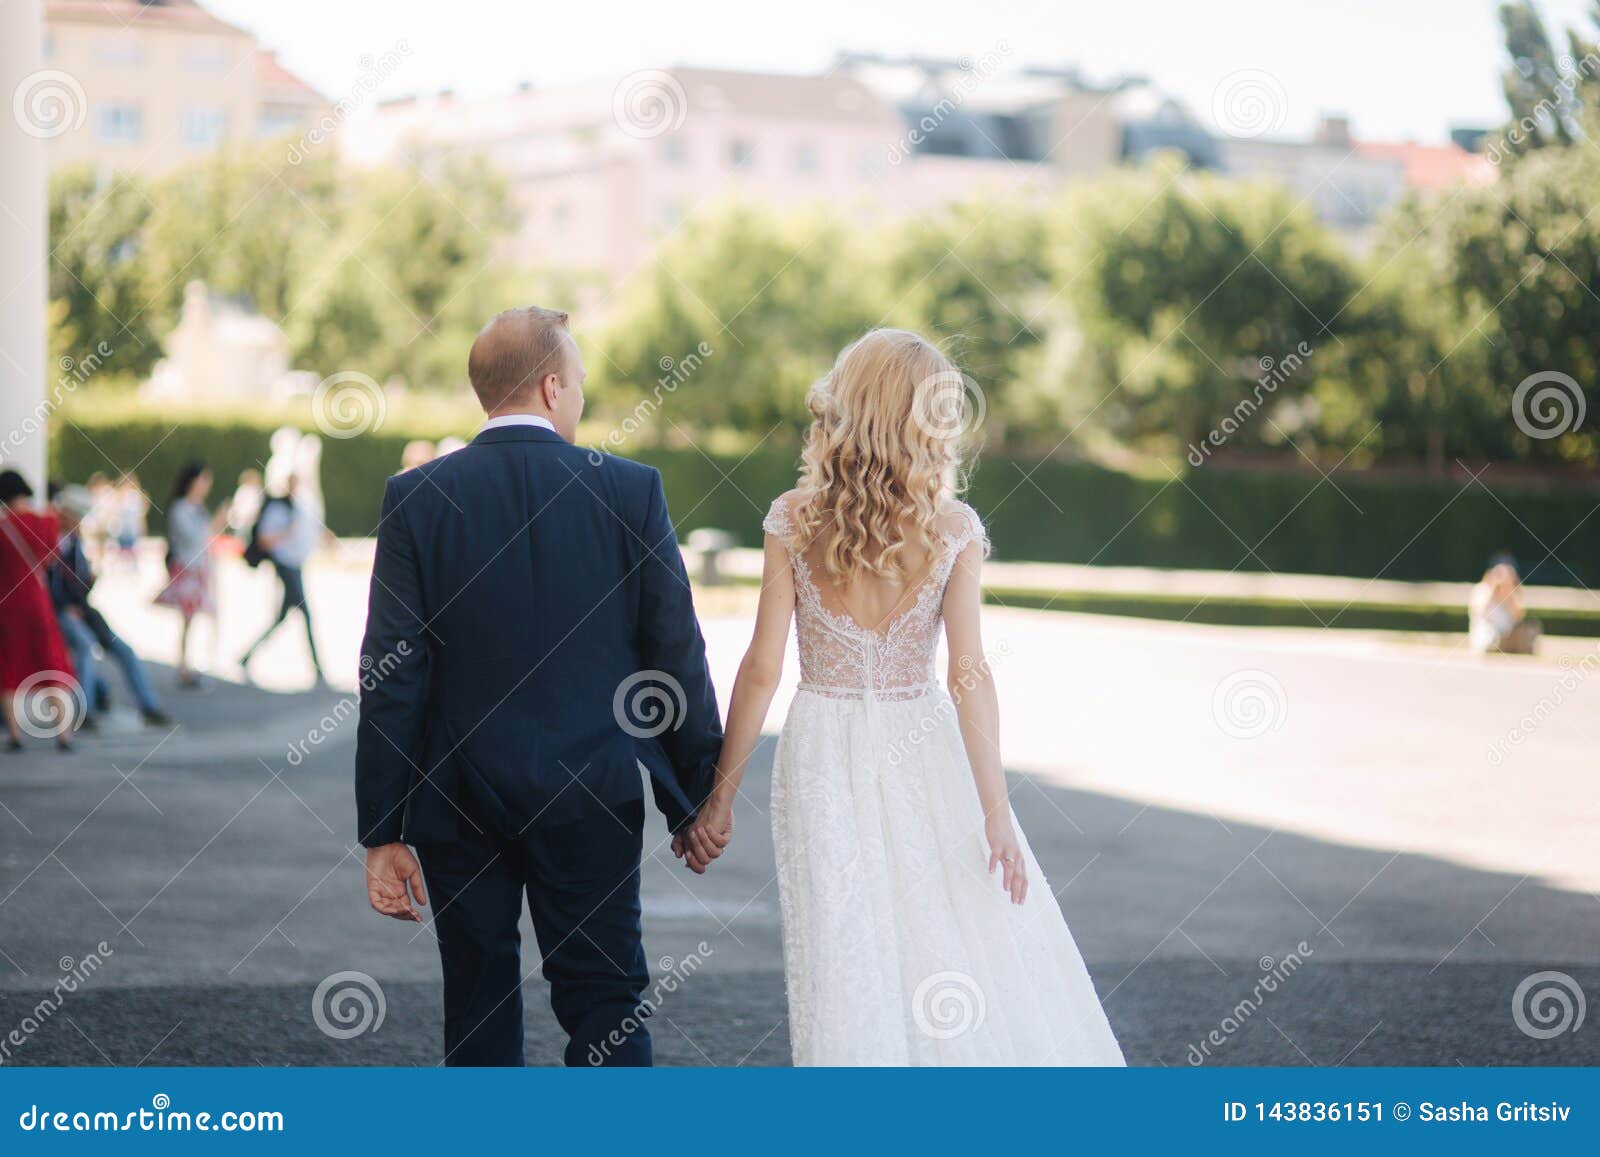 Wife With Her Husband Walking By The Pal image